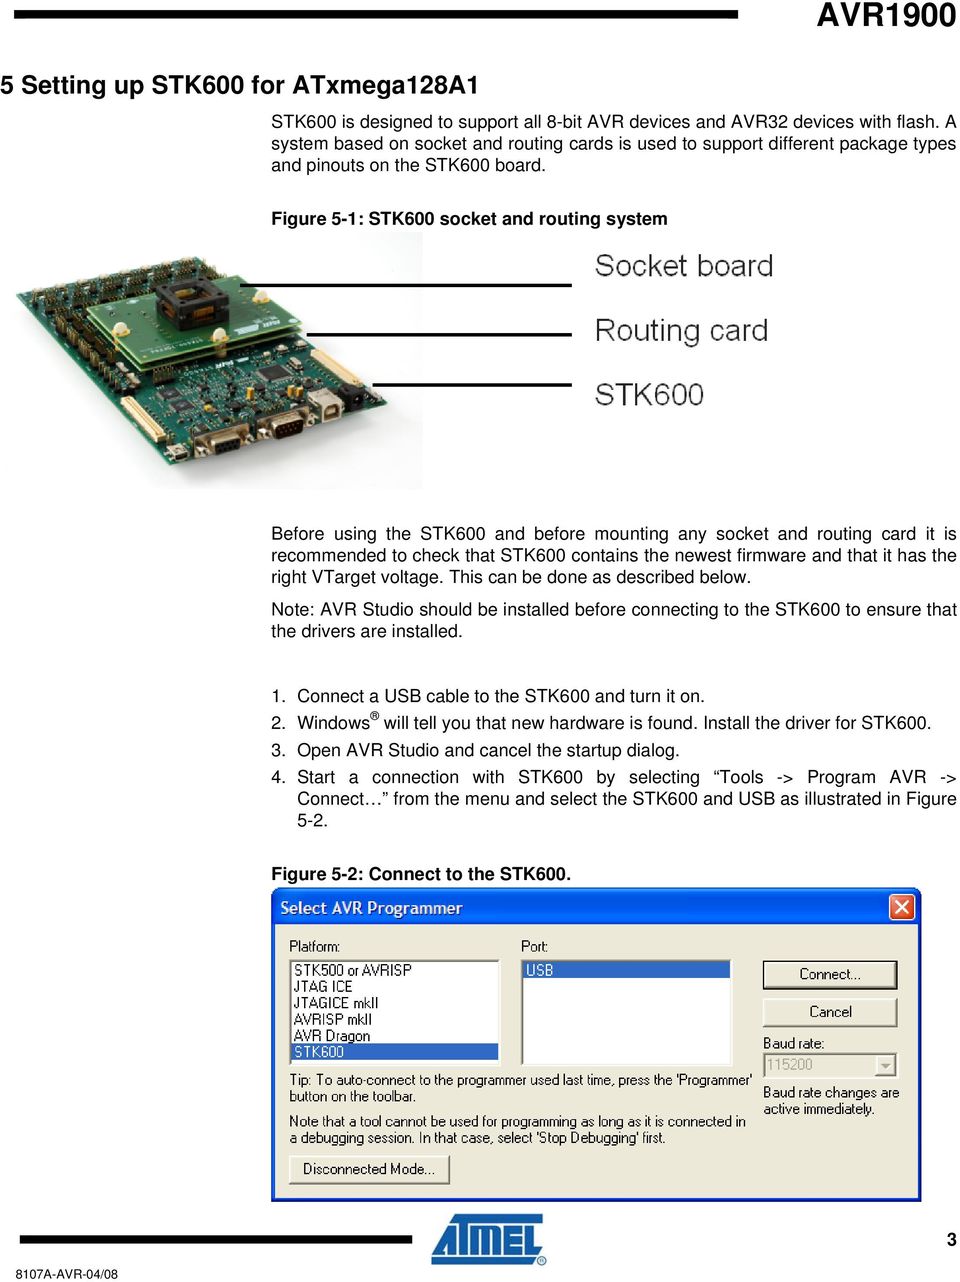 Figure 5-1: STK600 socket and routing system Before using the STK600 and before mounting any socket and routing card it is recommended to check that STK600 contains the newest firmware and that it